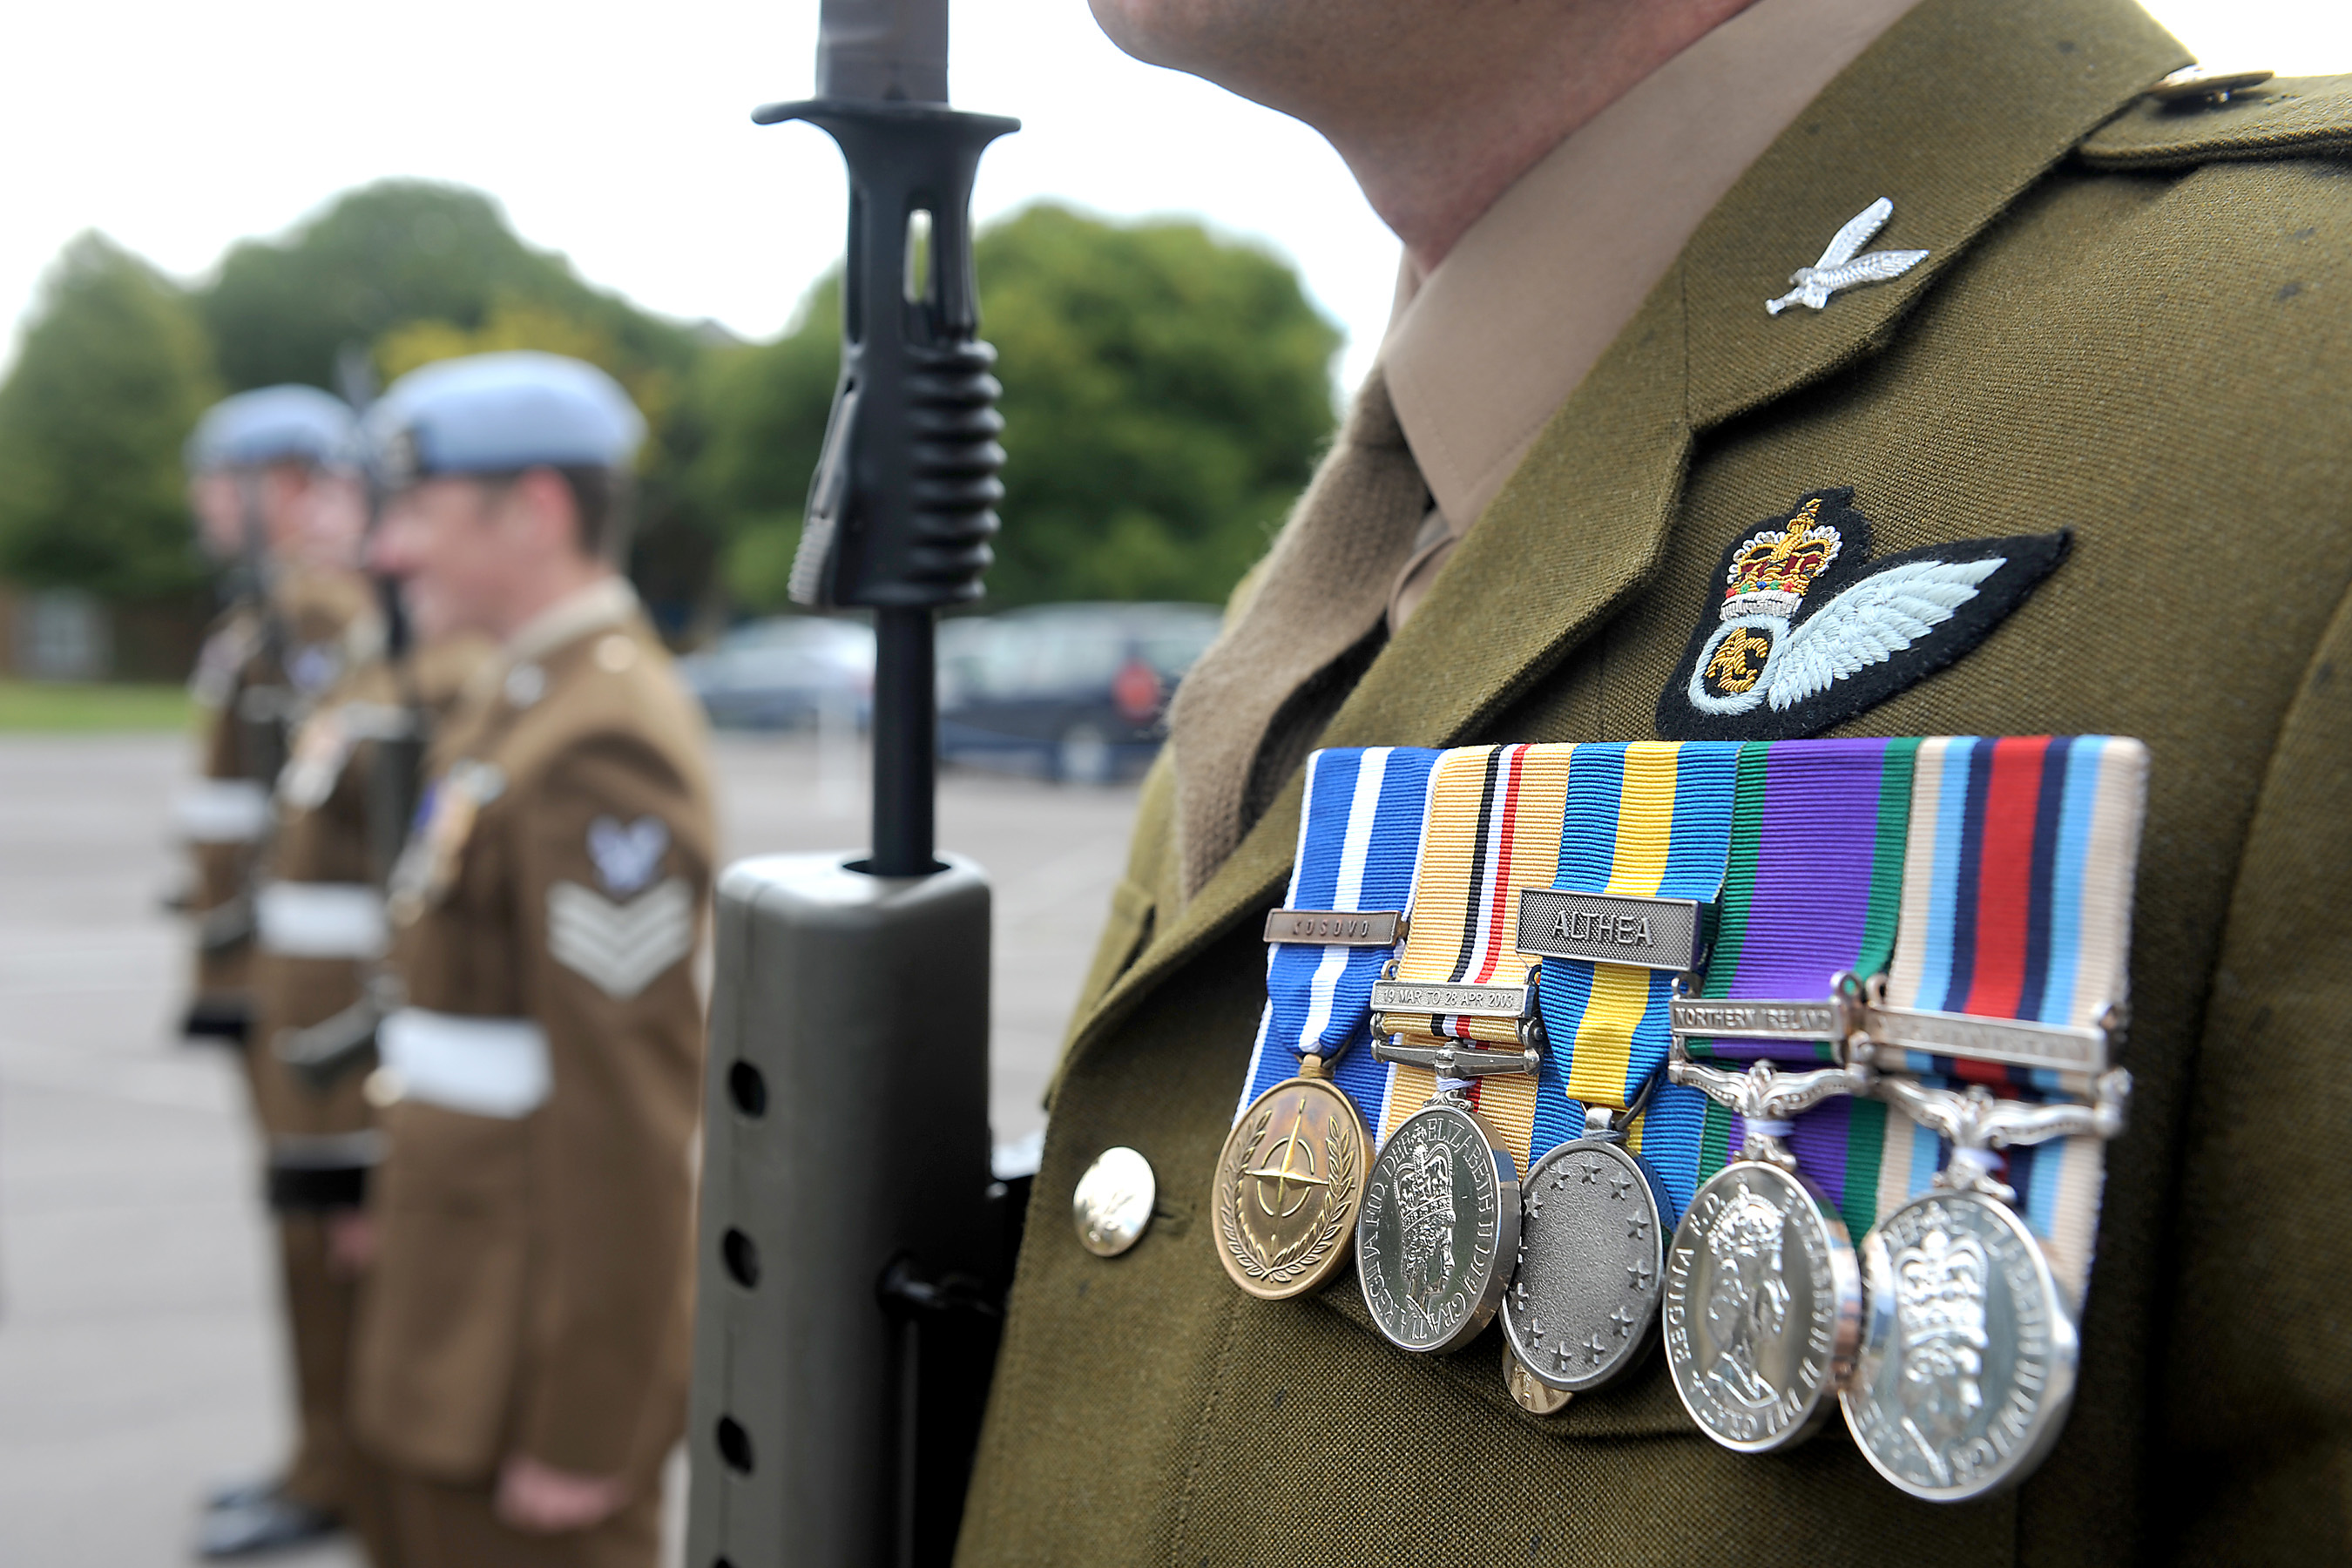 Previously lost army military Medals hang from uniform.